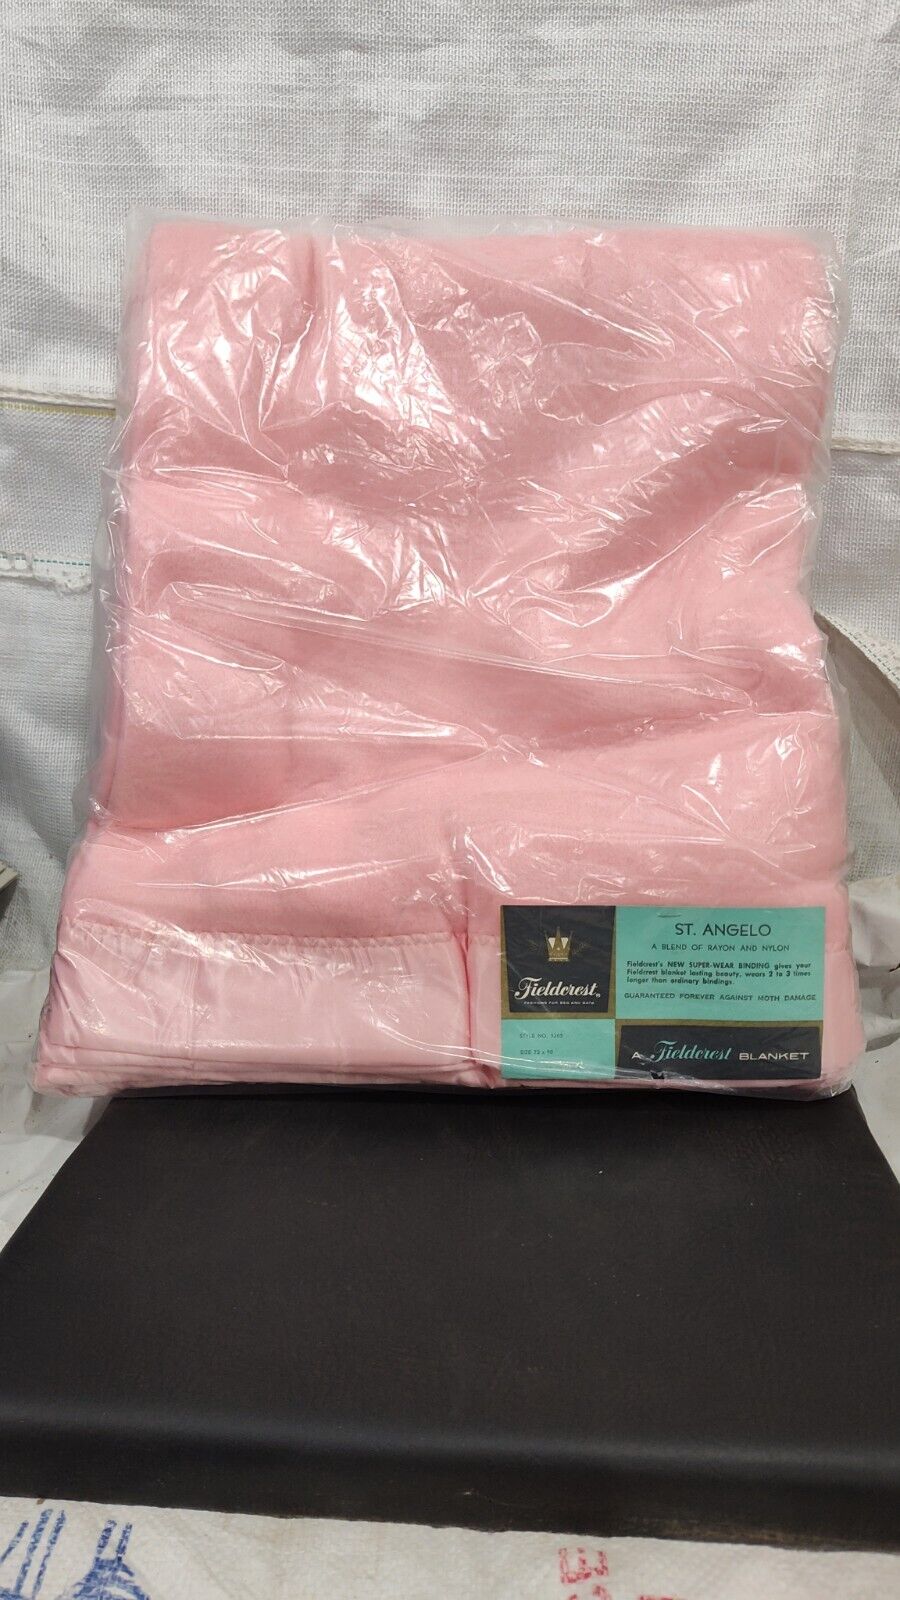 Vintage Pink Blanket  Fieldcrest ST ANGELO Rayon AND Nylon STYLE NO 5205 SIZE 72